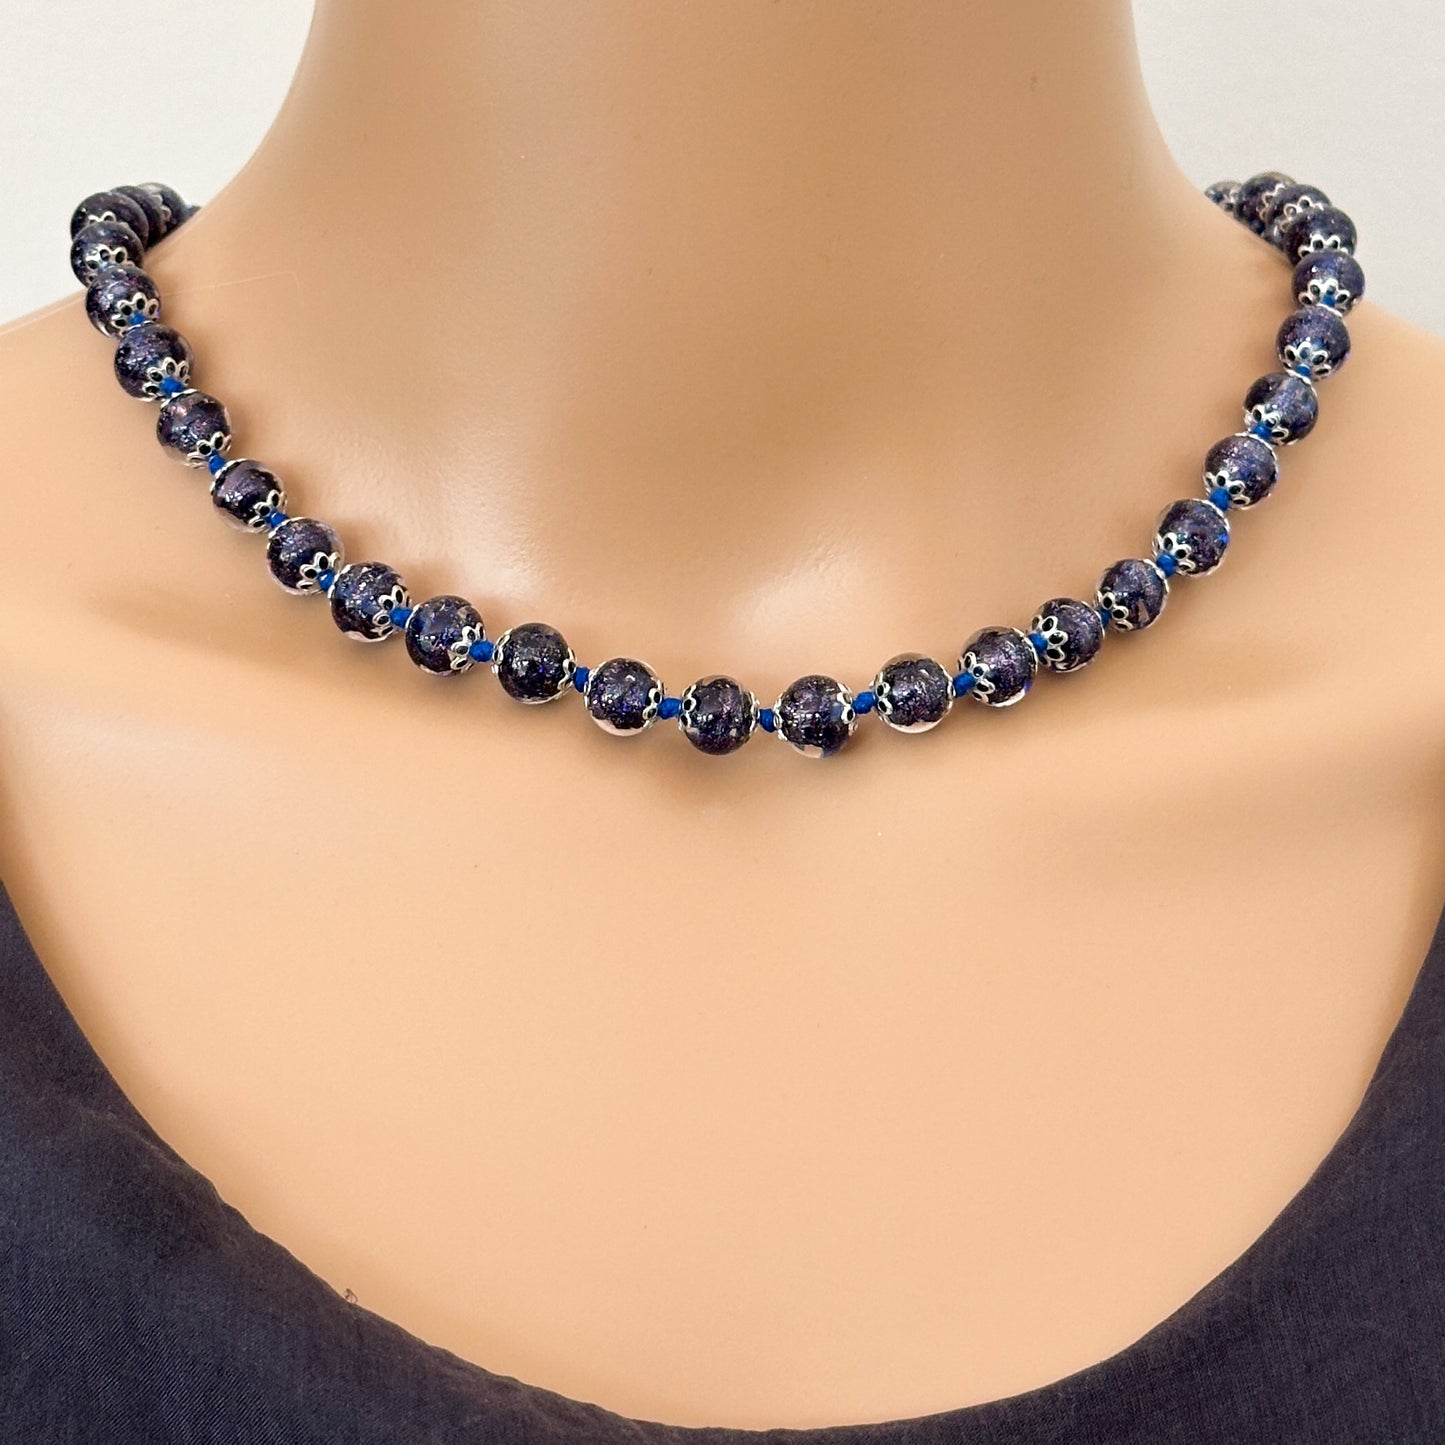 Murano glass bead necklace with silver findings